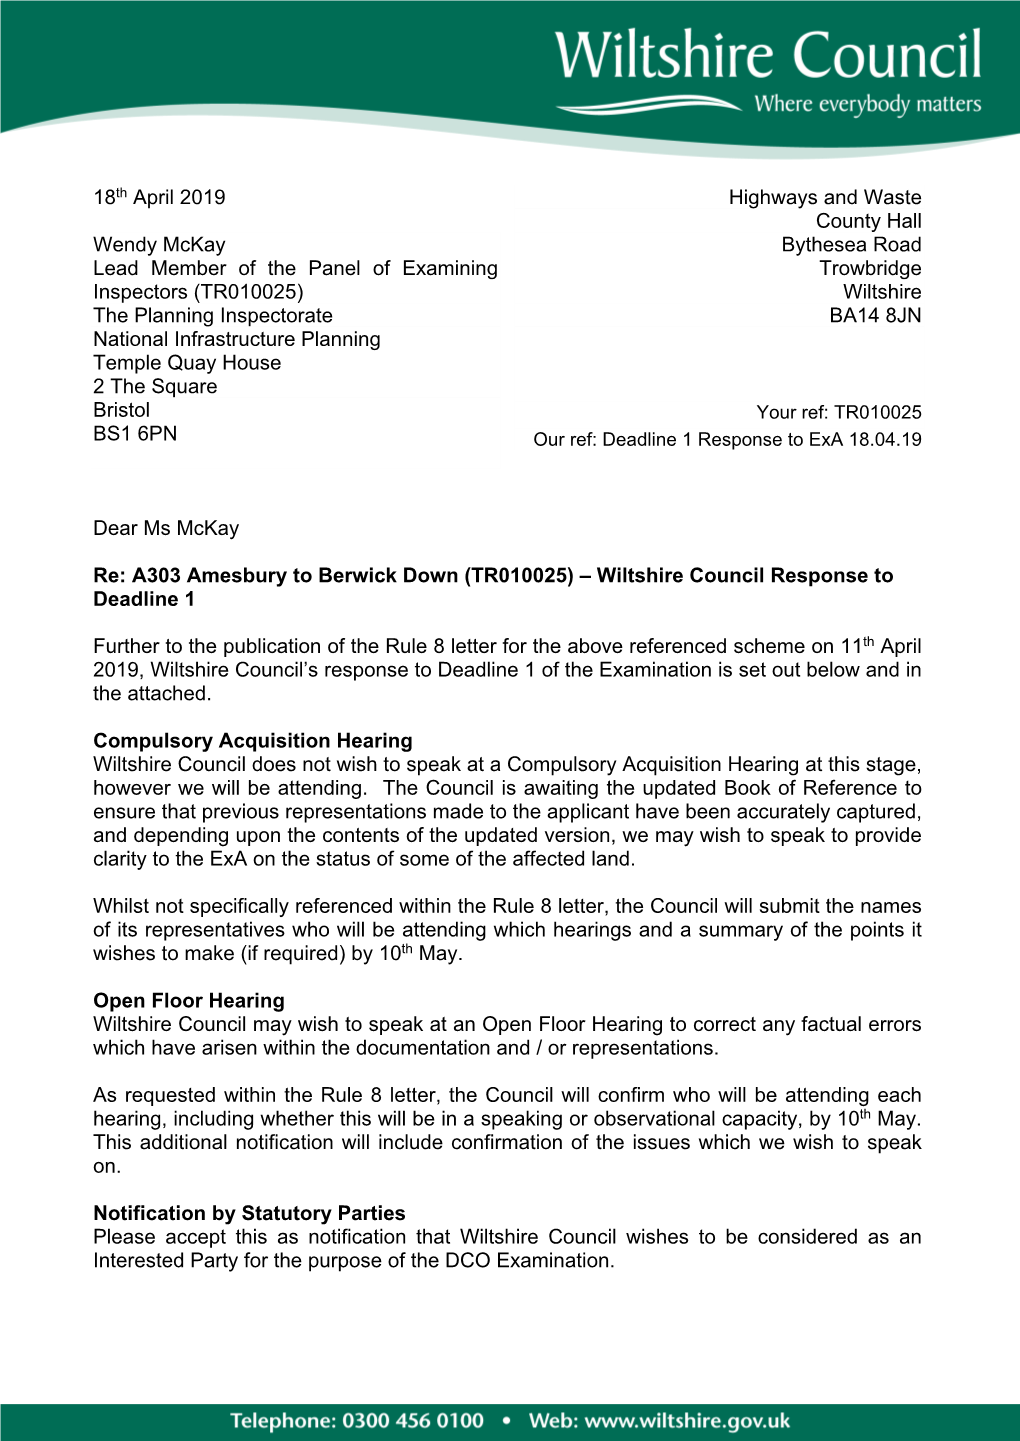 A303 Amesbury to Berwick Down (TR010025) – Wiltshire Council Response to Deadline 1